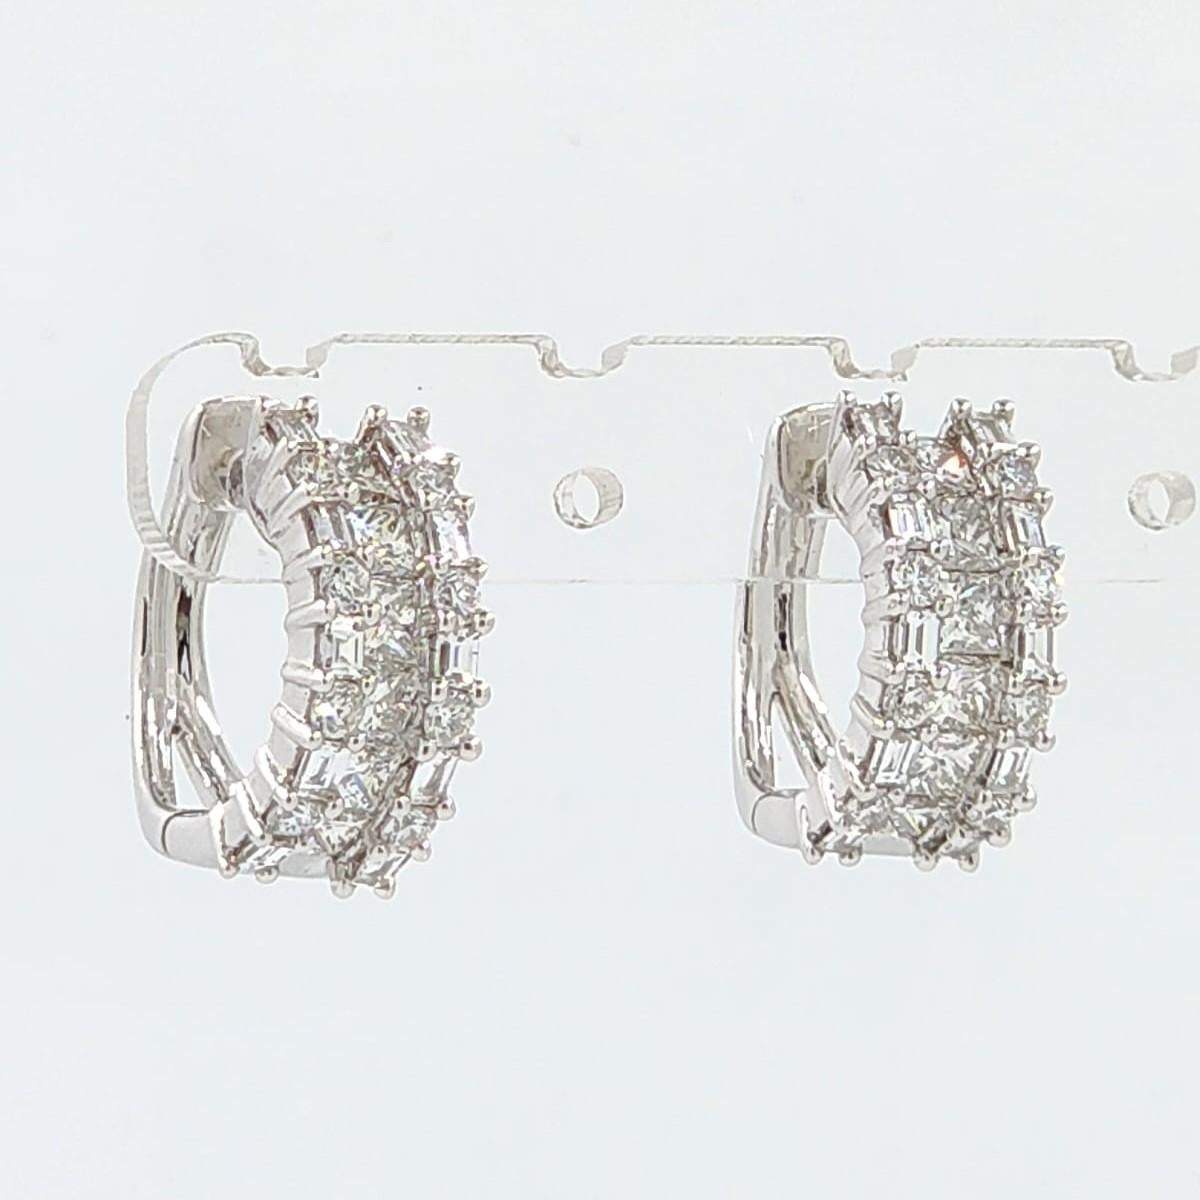 Introducing a stunning pair of diamond hoop earrings that are perfect for any occasion. These exquisite earrings feature a combination of baguette, princess, and round diamonds, totaling 2.2 carats, set in 18 karat white gold for a timeless and